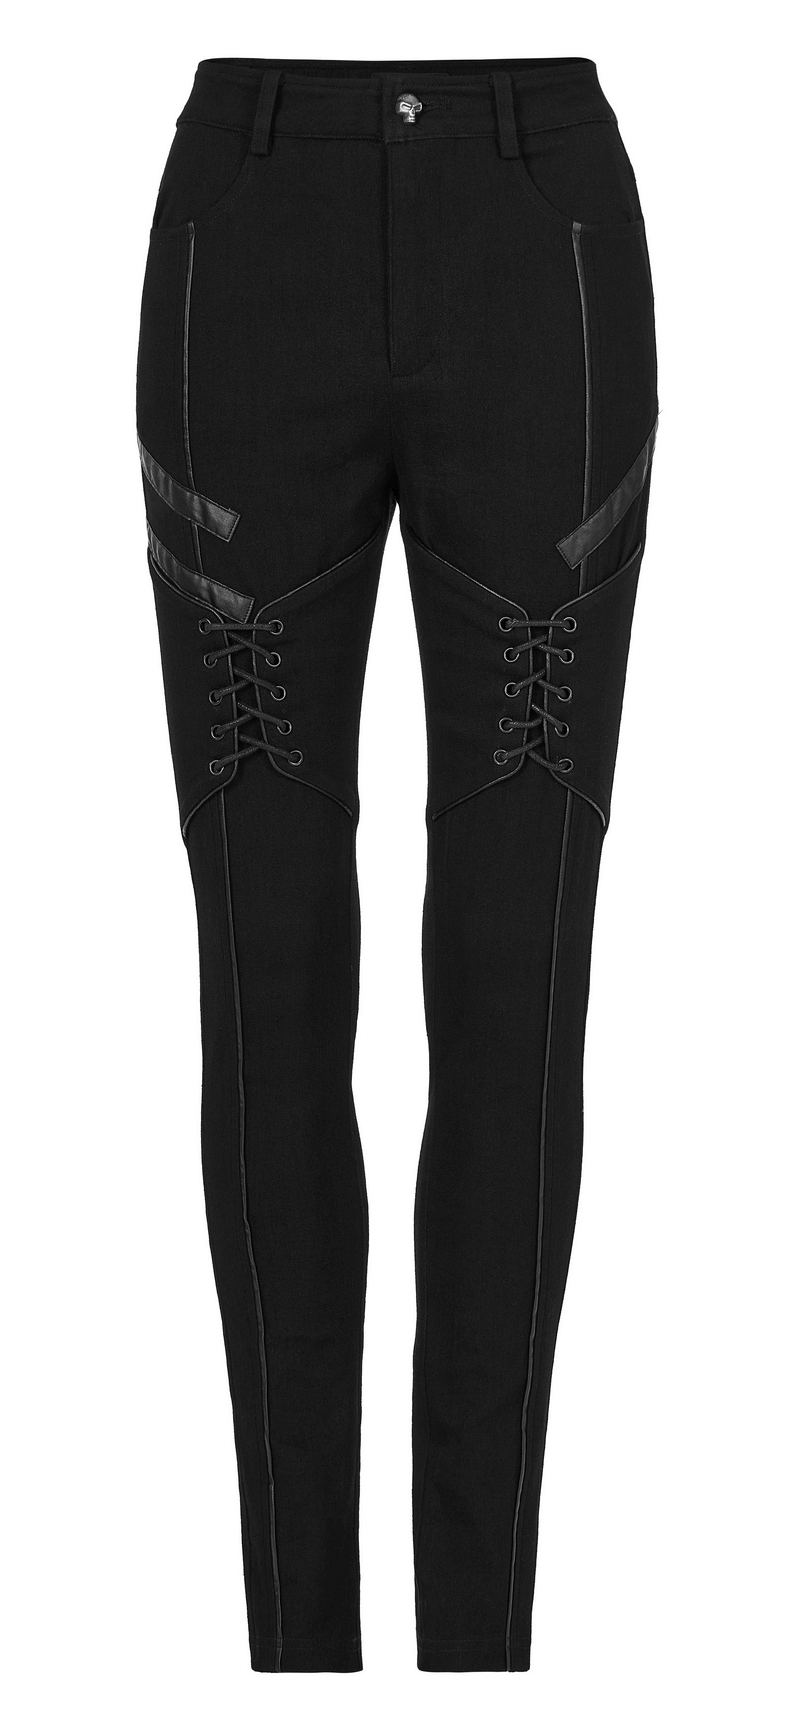 Chic Women's Lace-Up Skinny Jeans in Gothic Style - HARD'N'HEAVY